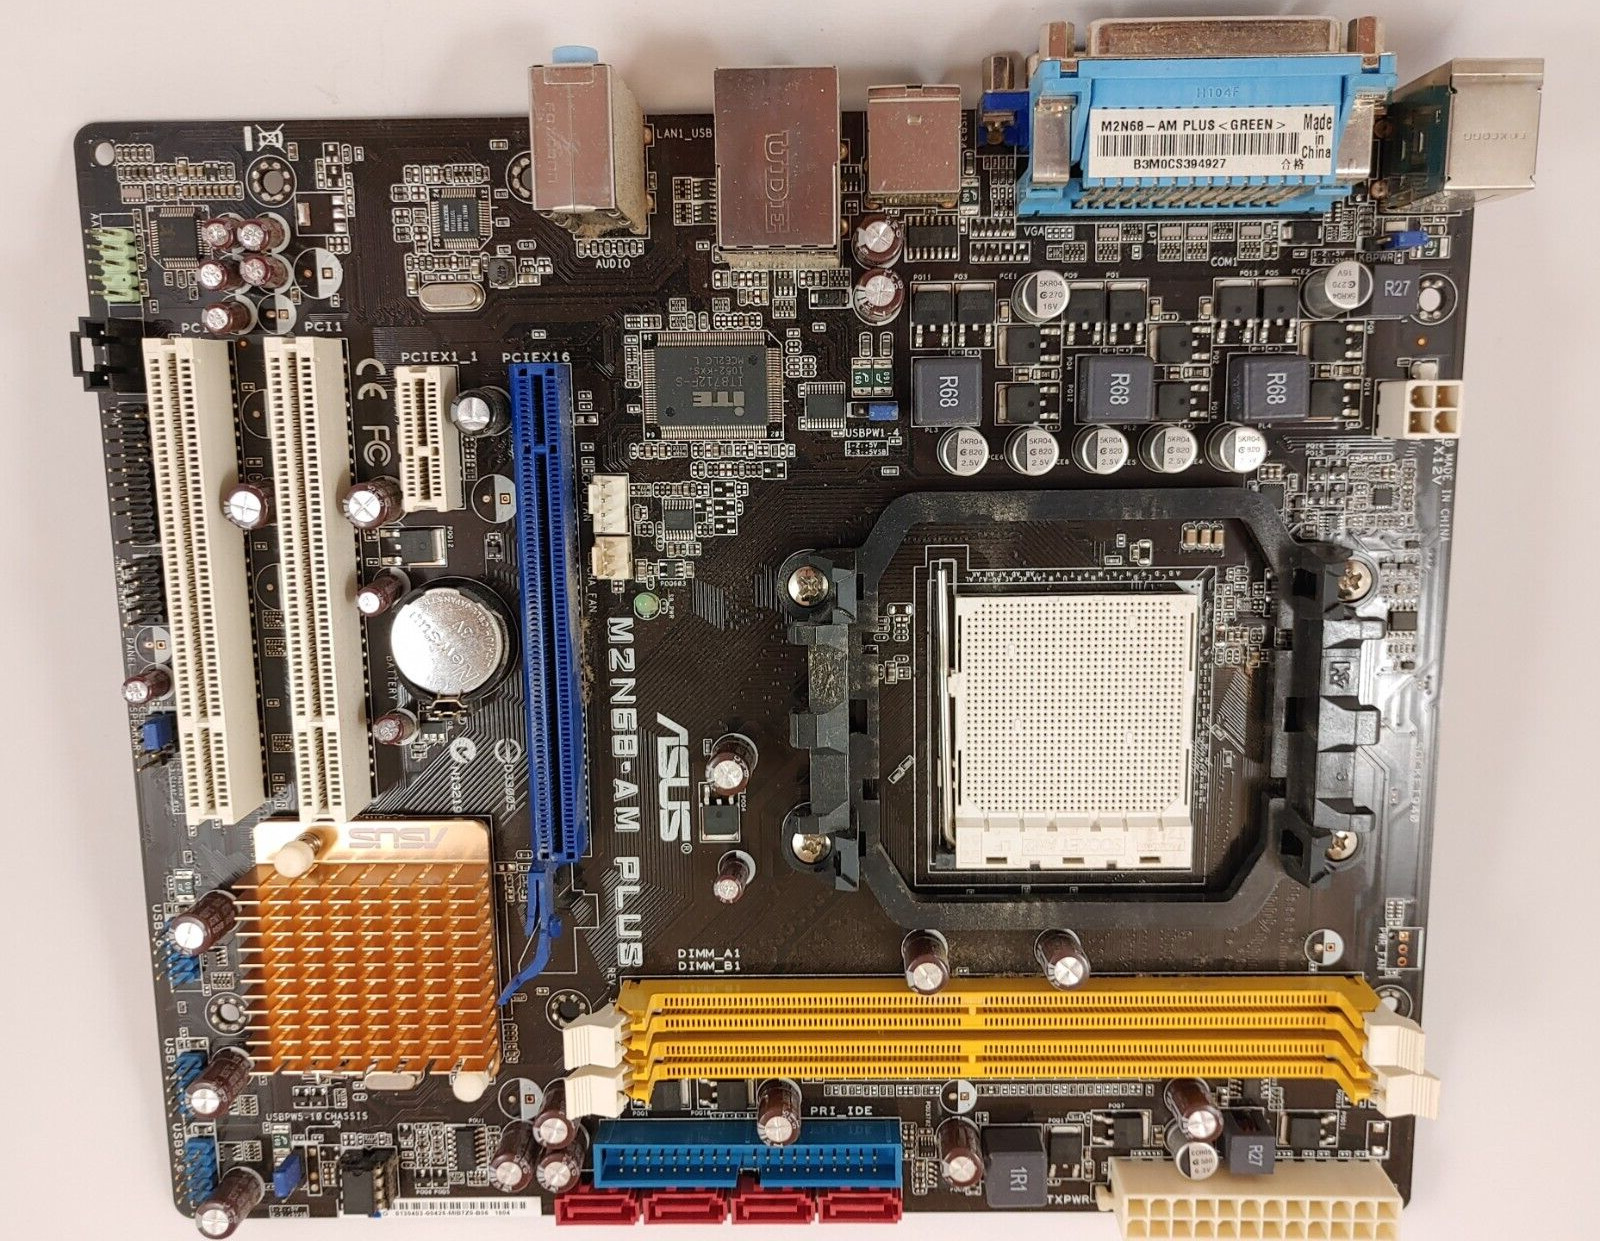 ASUS M2N68-AM PLUS Motherboard. Comes with 2 DDR2-800 CL5 SDRAM. W/ Original Box